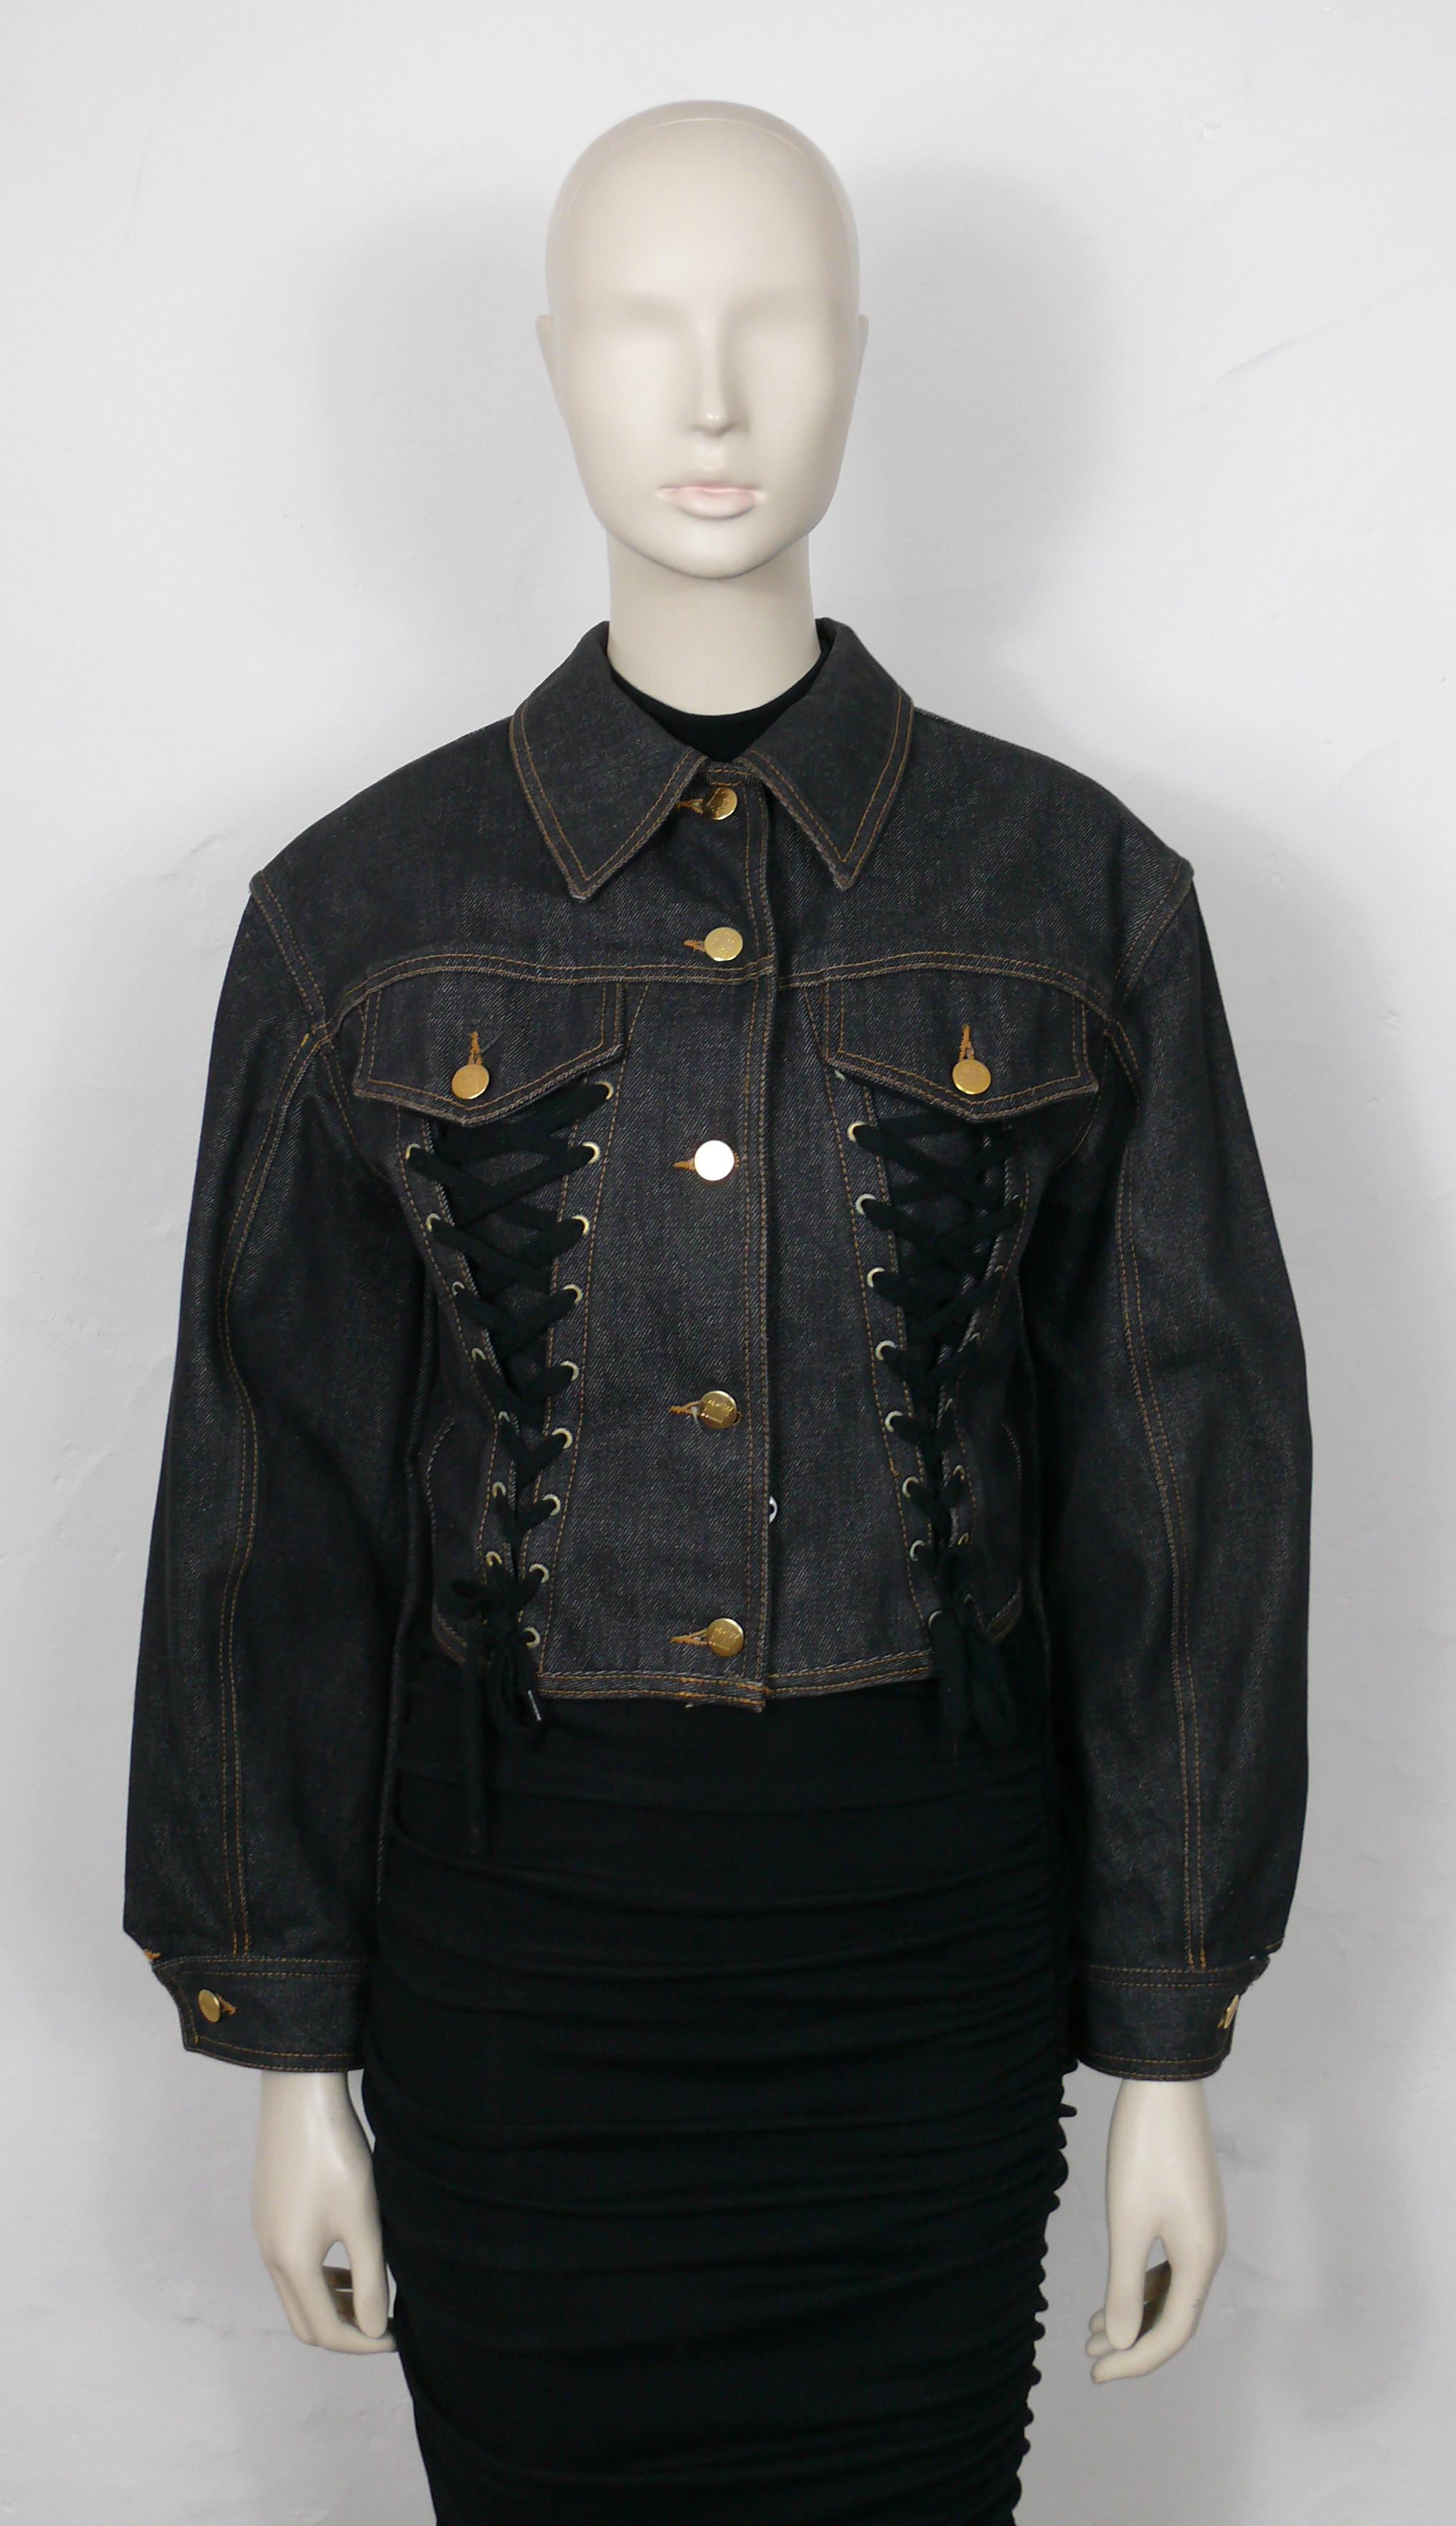 JEAN PAUL GAULTIER Junior vintage distressed black denim iconic corset style jacket.

This jacket features :
- Distressed black denim.
- Classic collar.
- Front button down fastening.
- Front lace up detail.
- Long sleeves with button cuffs
- Pocket